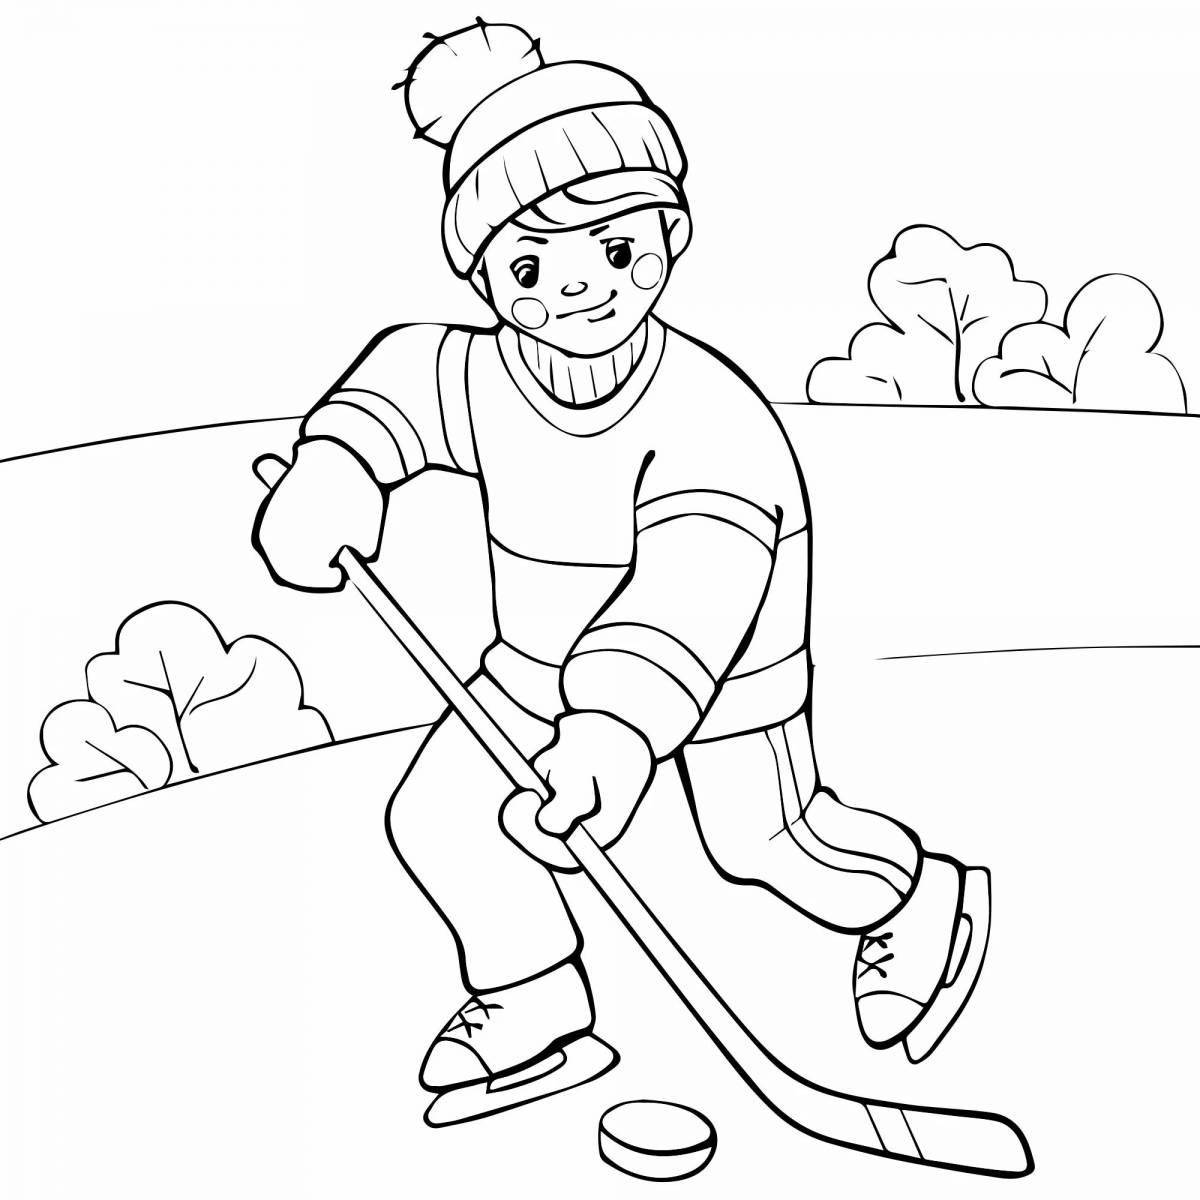 Cute sports coloring pages for kids